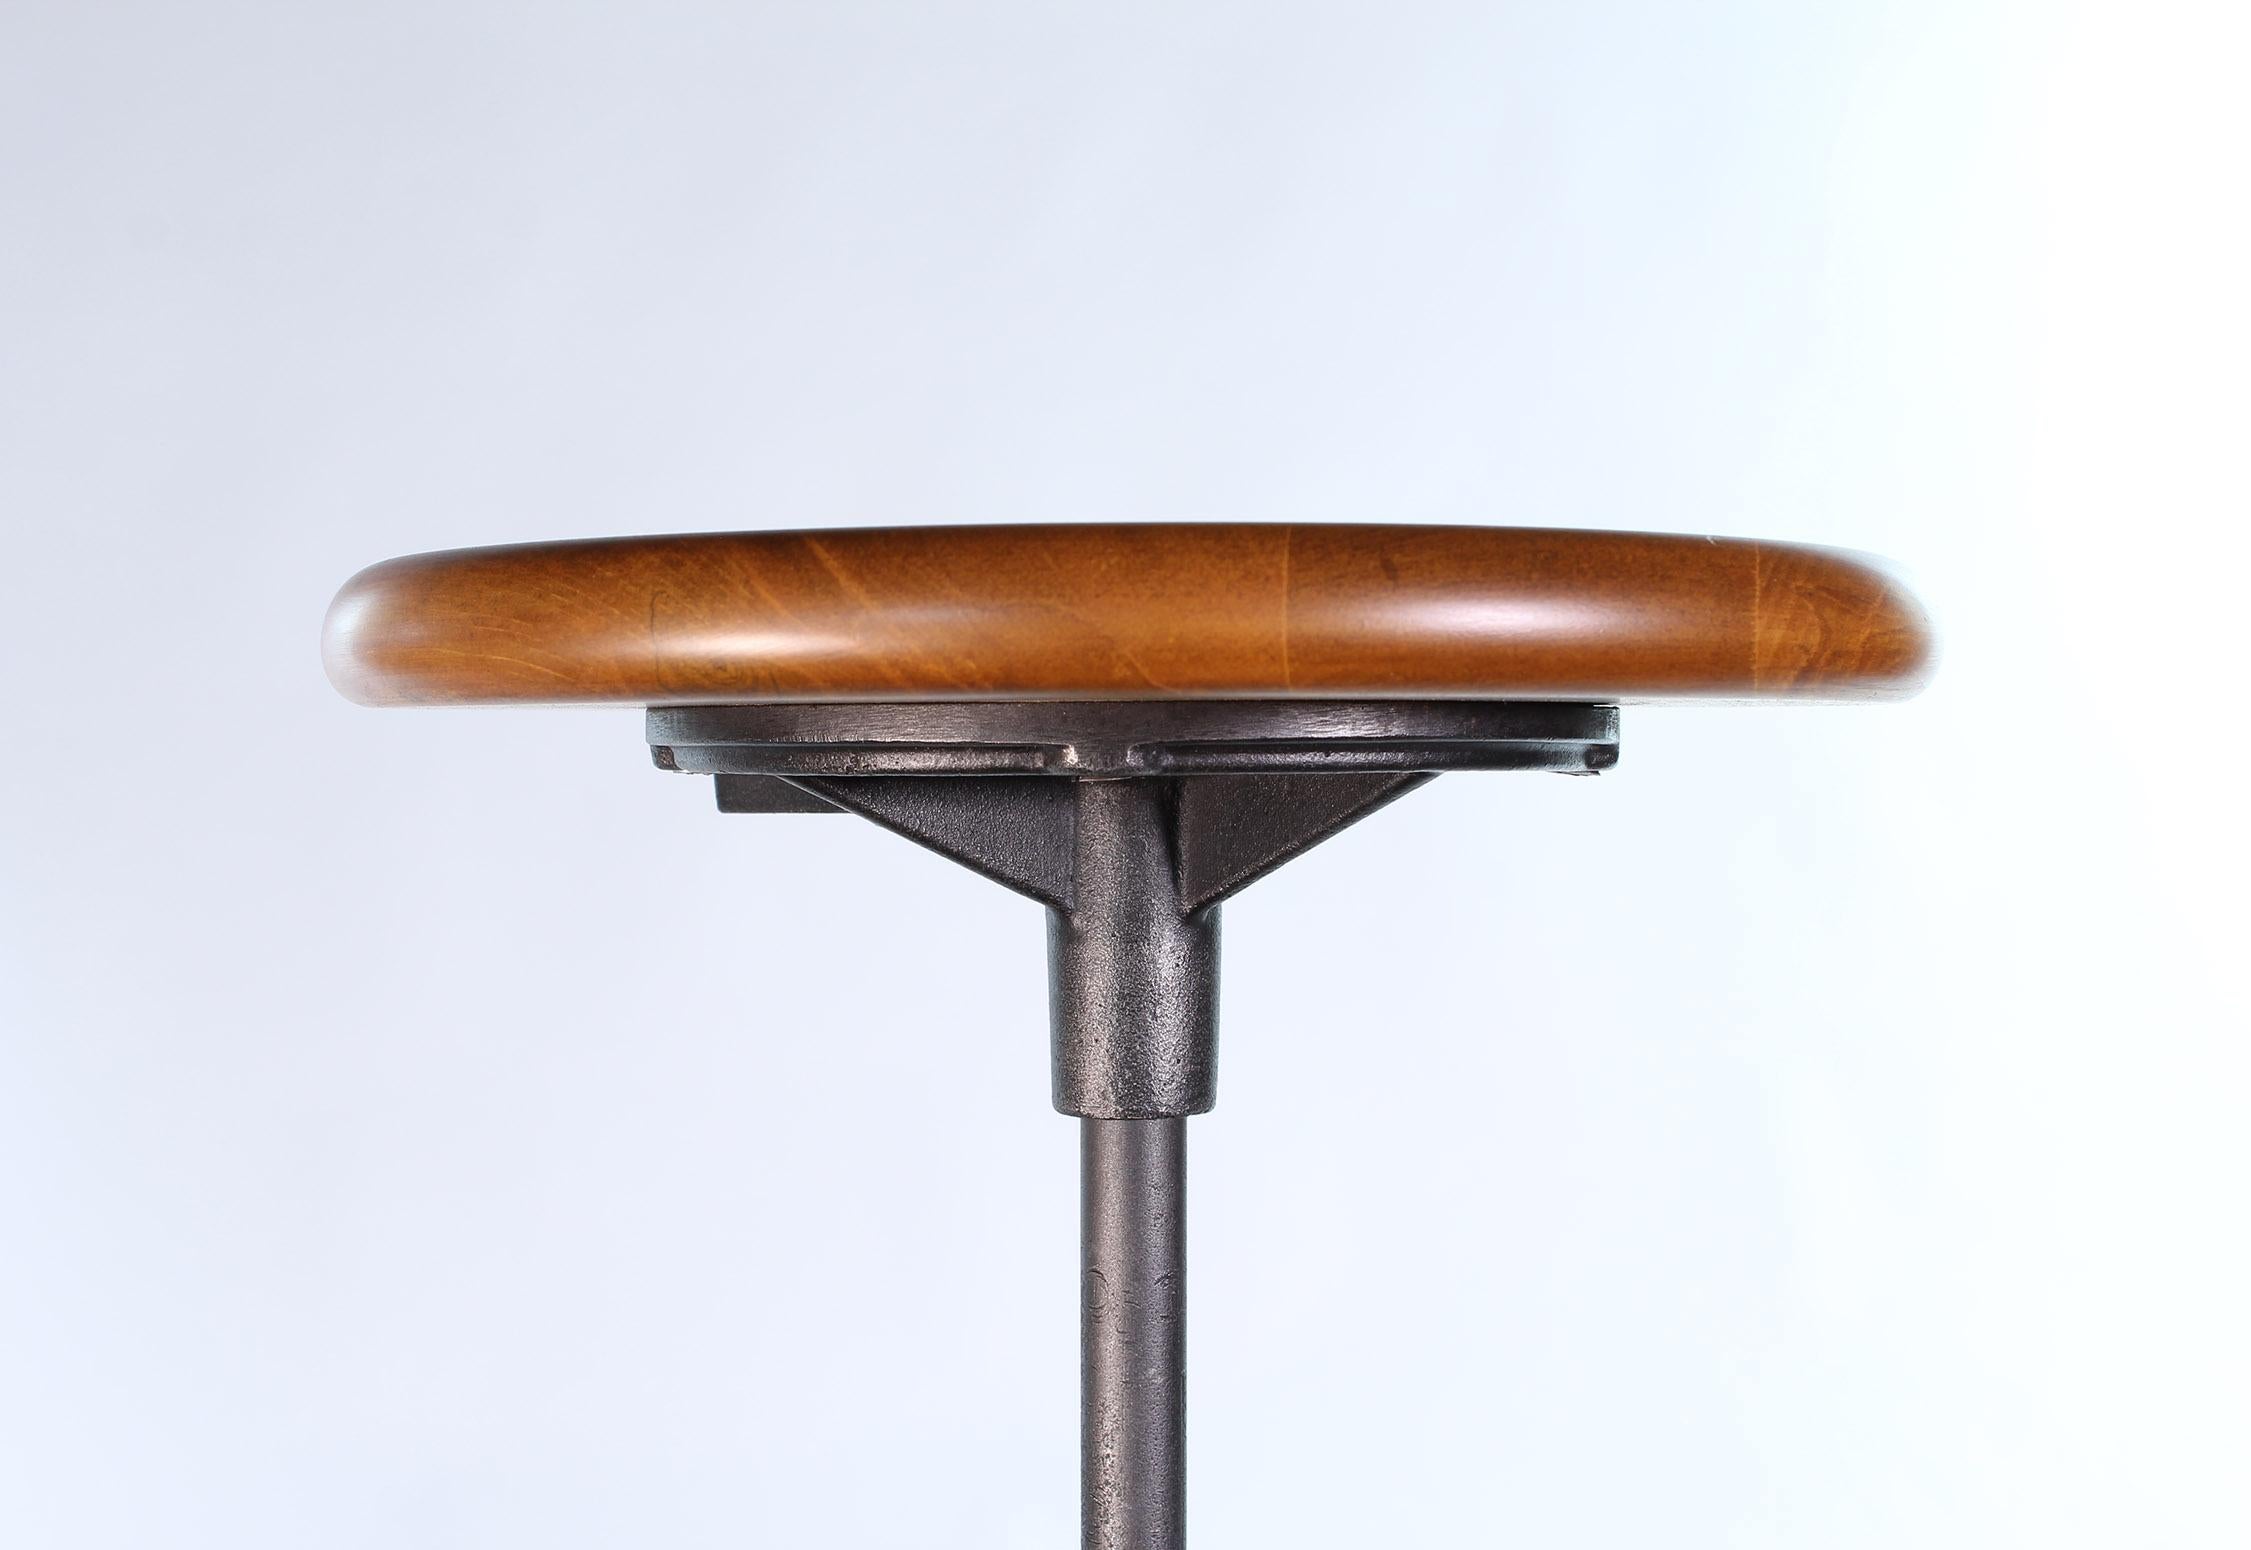 Industrial Stool Antique New Britain Machine Co. Connecticut Backless Adjustable 4